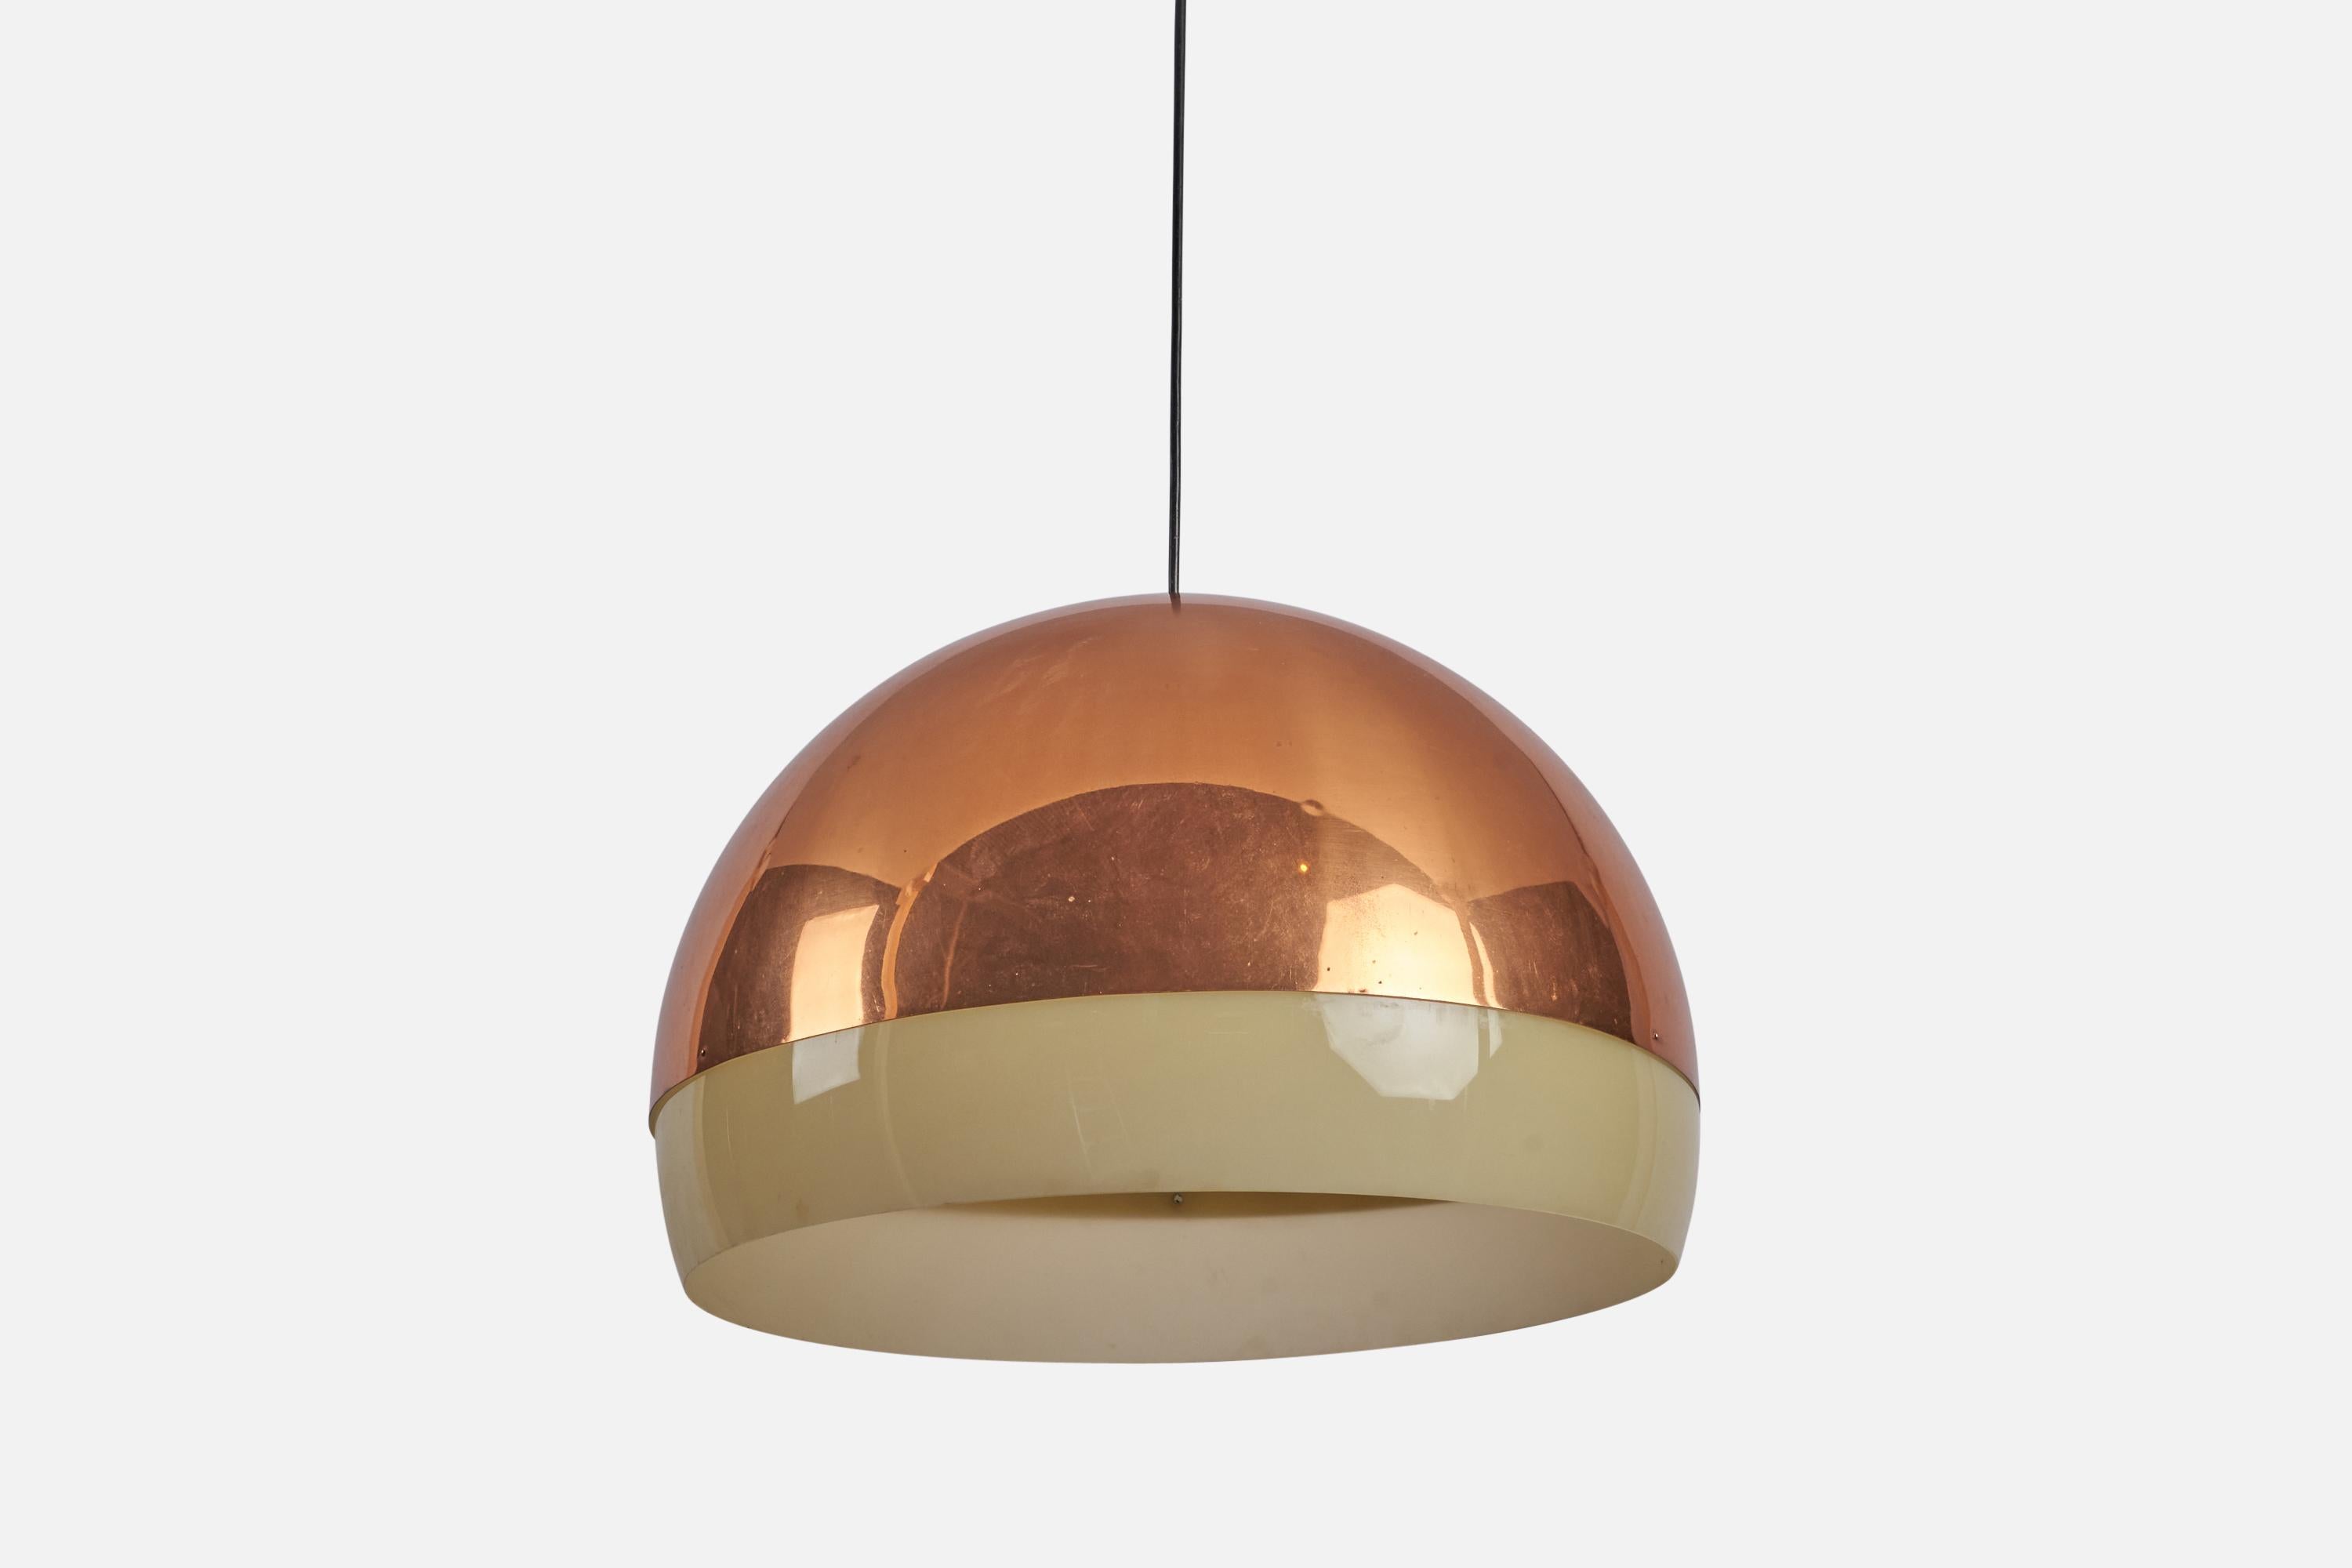 A sizeable copper and acrylic pendant designed by Yki Nummi and produced by Ornö, Finland c. 1960s

Overall Dimensions (inches): 12.25” H x 20” Diameter
Bulb Specifications: E-26 Bulb
Number of Sockets: 1